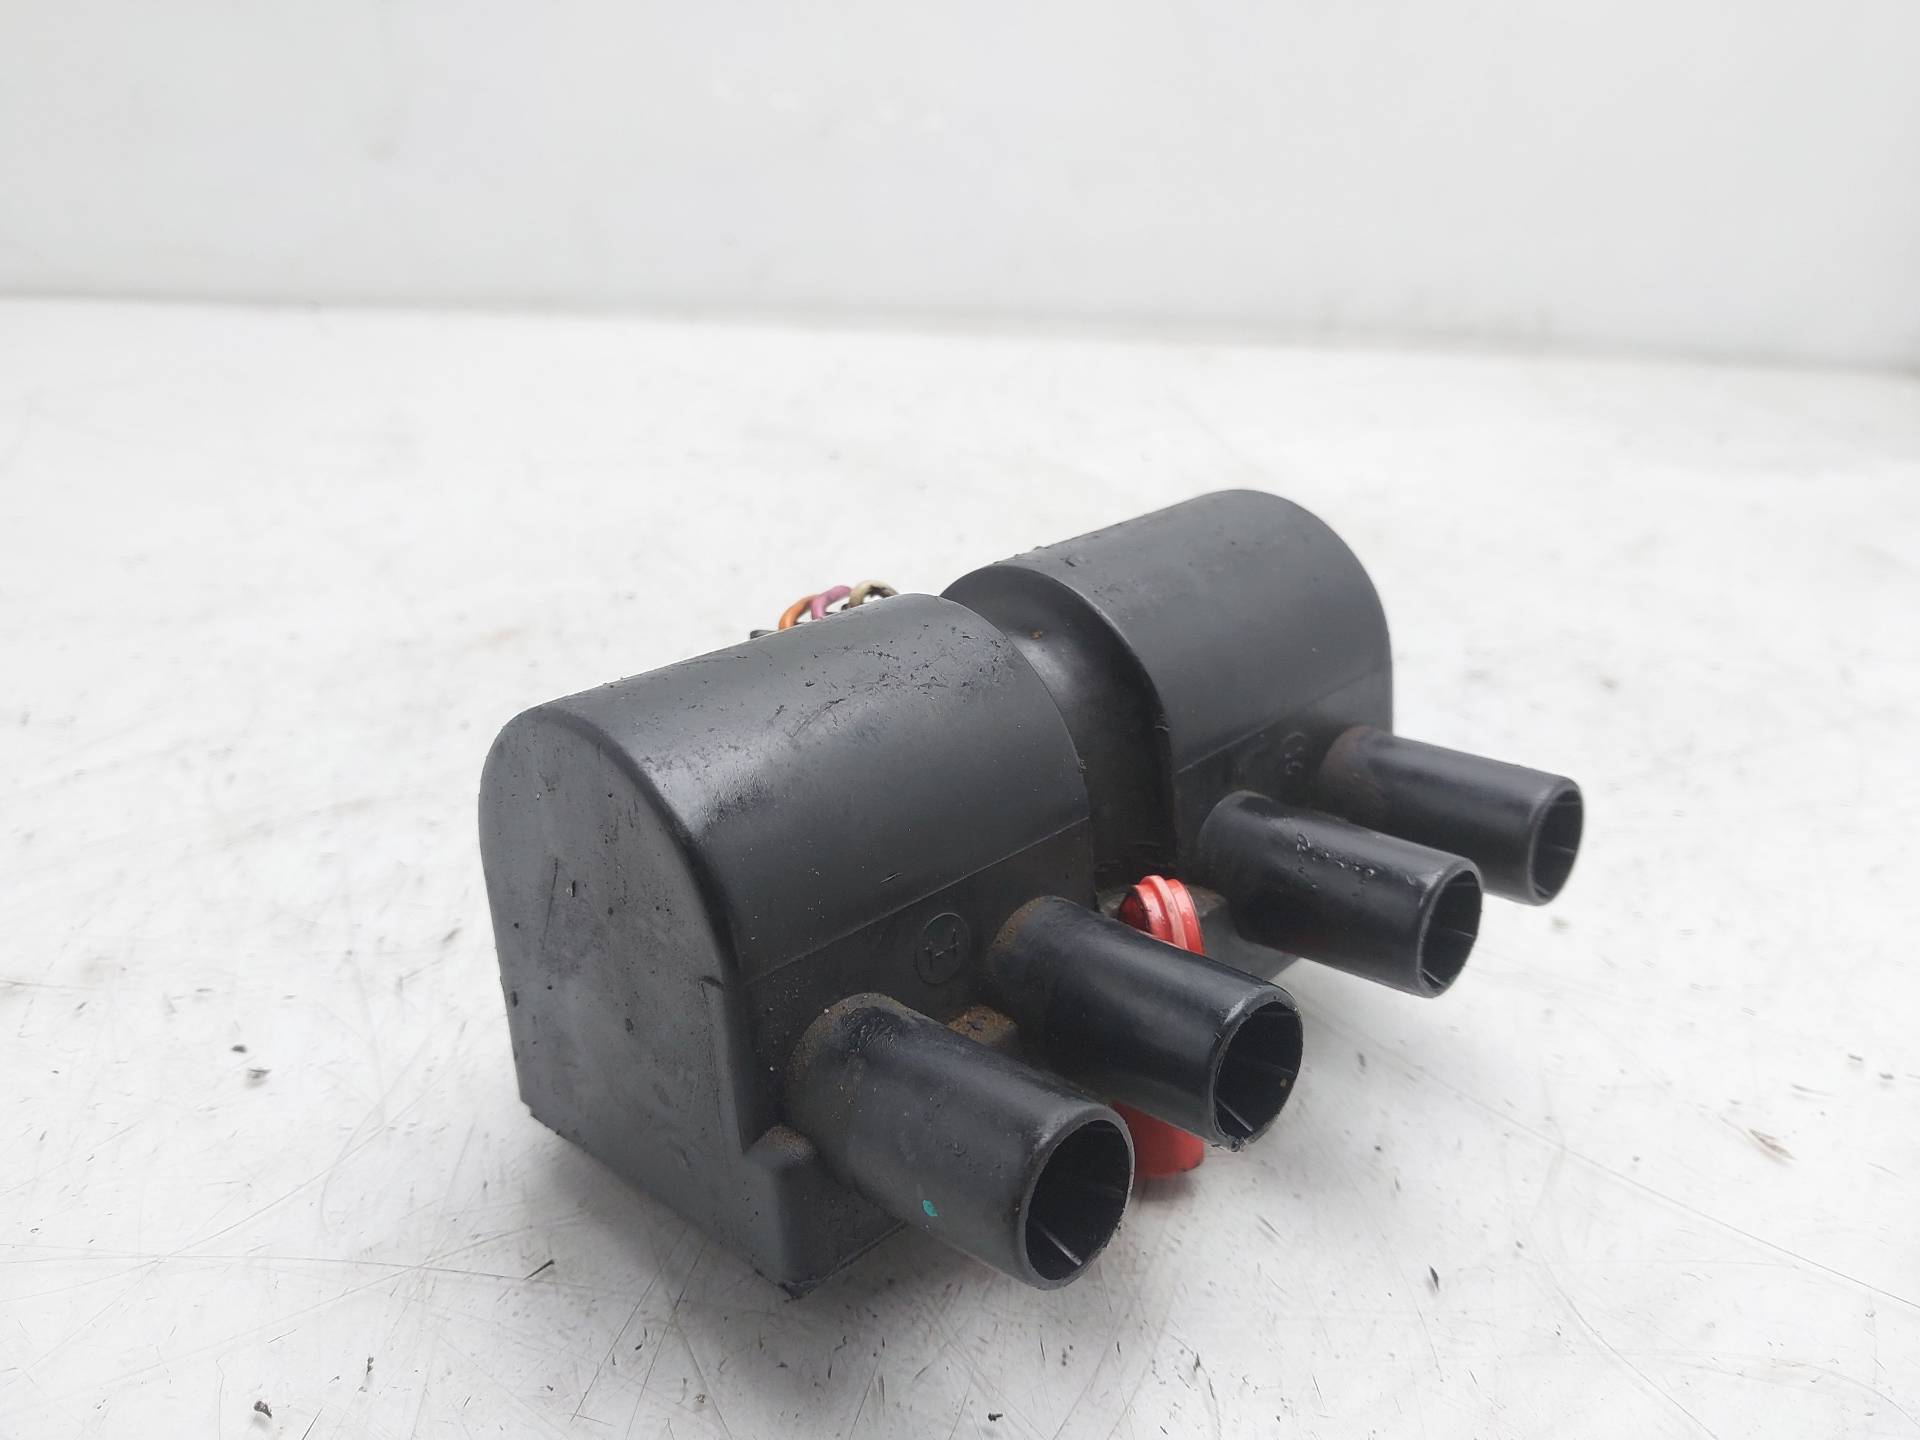 DAEWOO Kalos 1 generation (2002-2020) High Voltage Ignition Coil 96253555 25316632